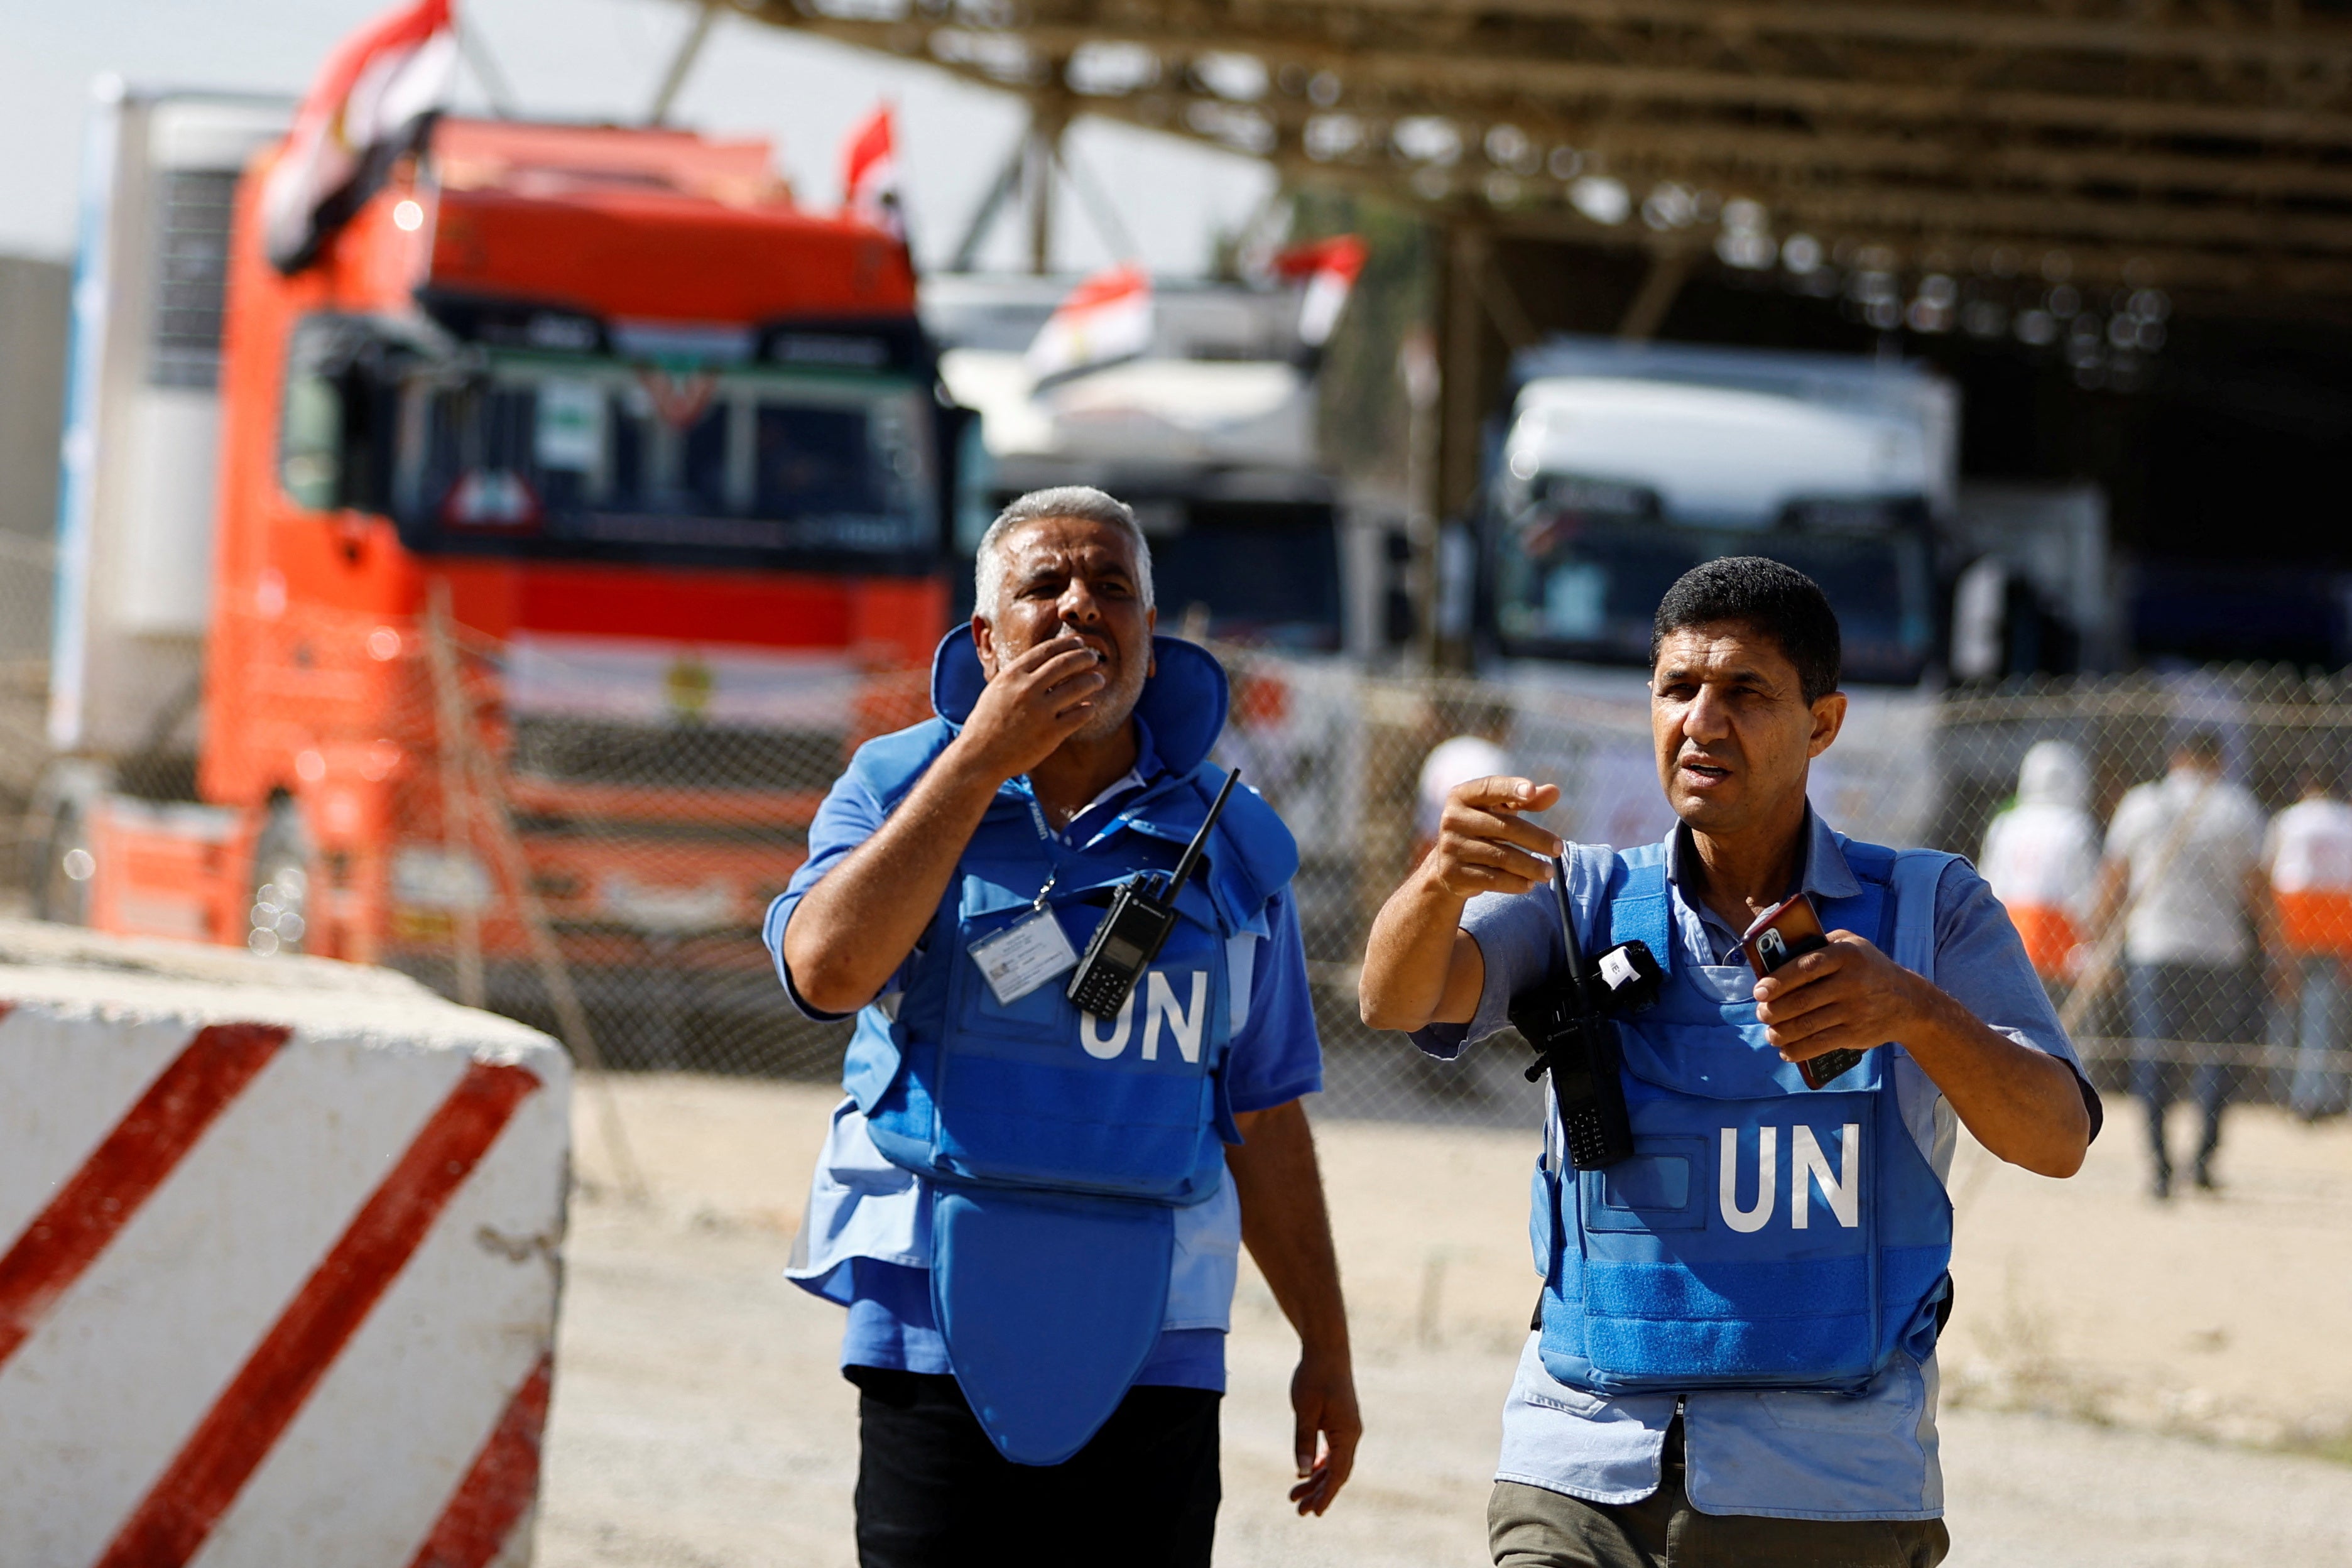 UN workers as trucks carrying aid arrive at the Palestinian side of the border with Egypt